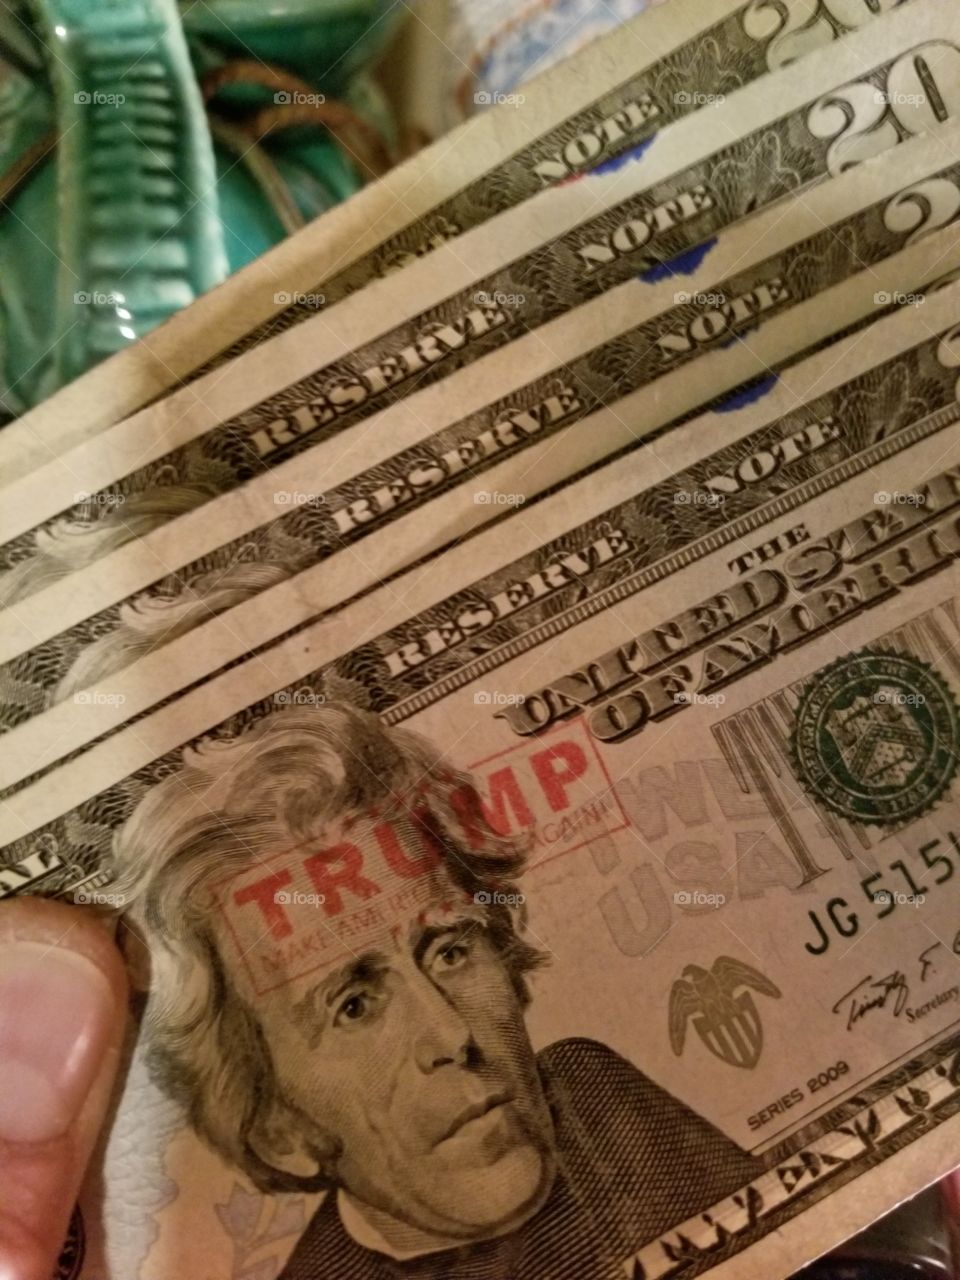 So I got this..20 dollar bill with President Trumps Make America Great stamp